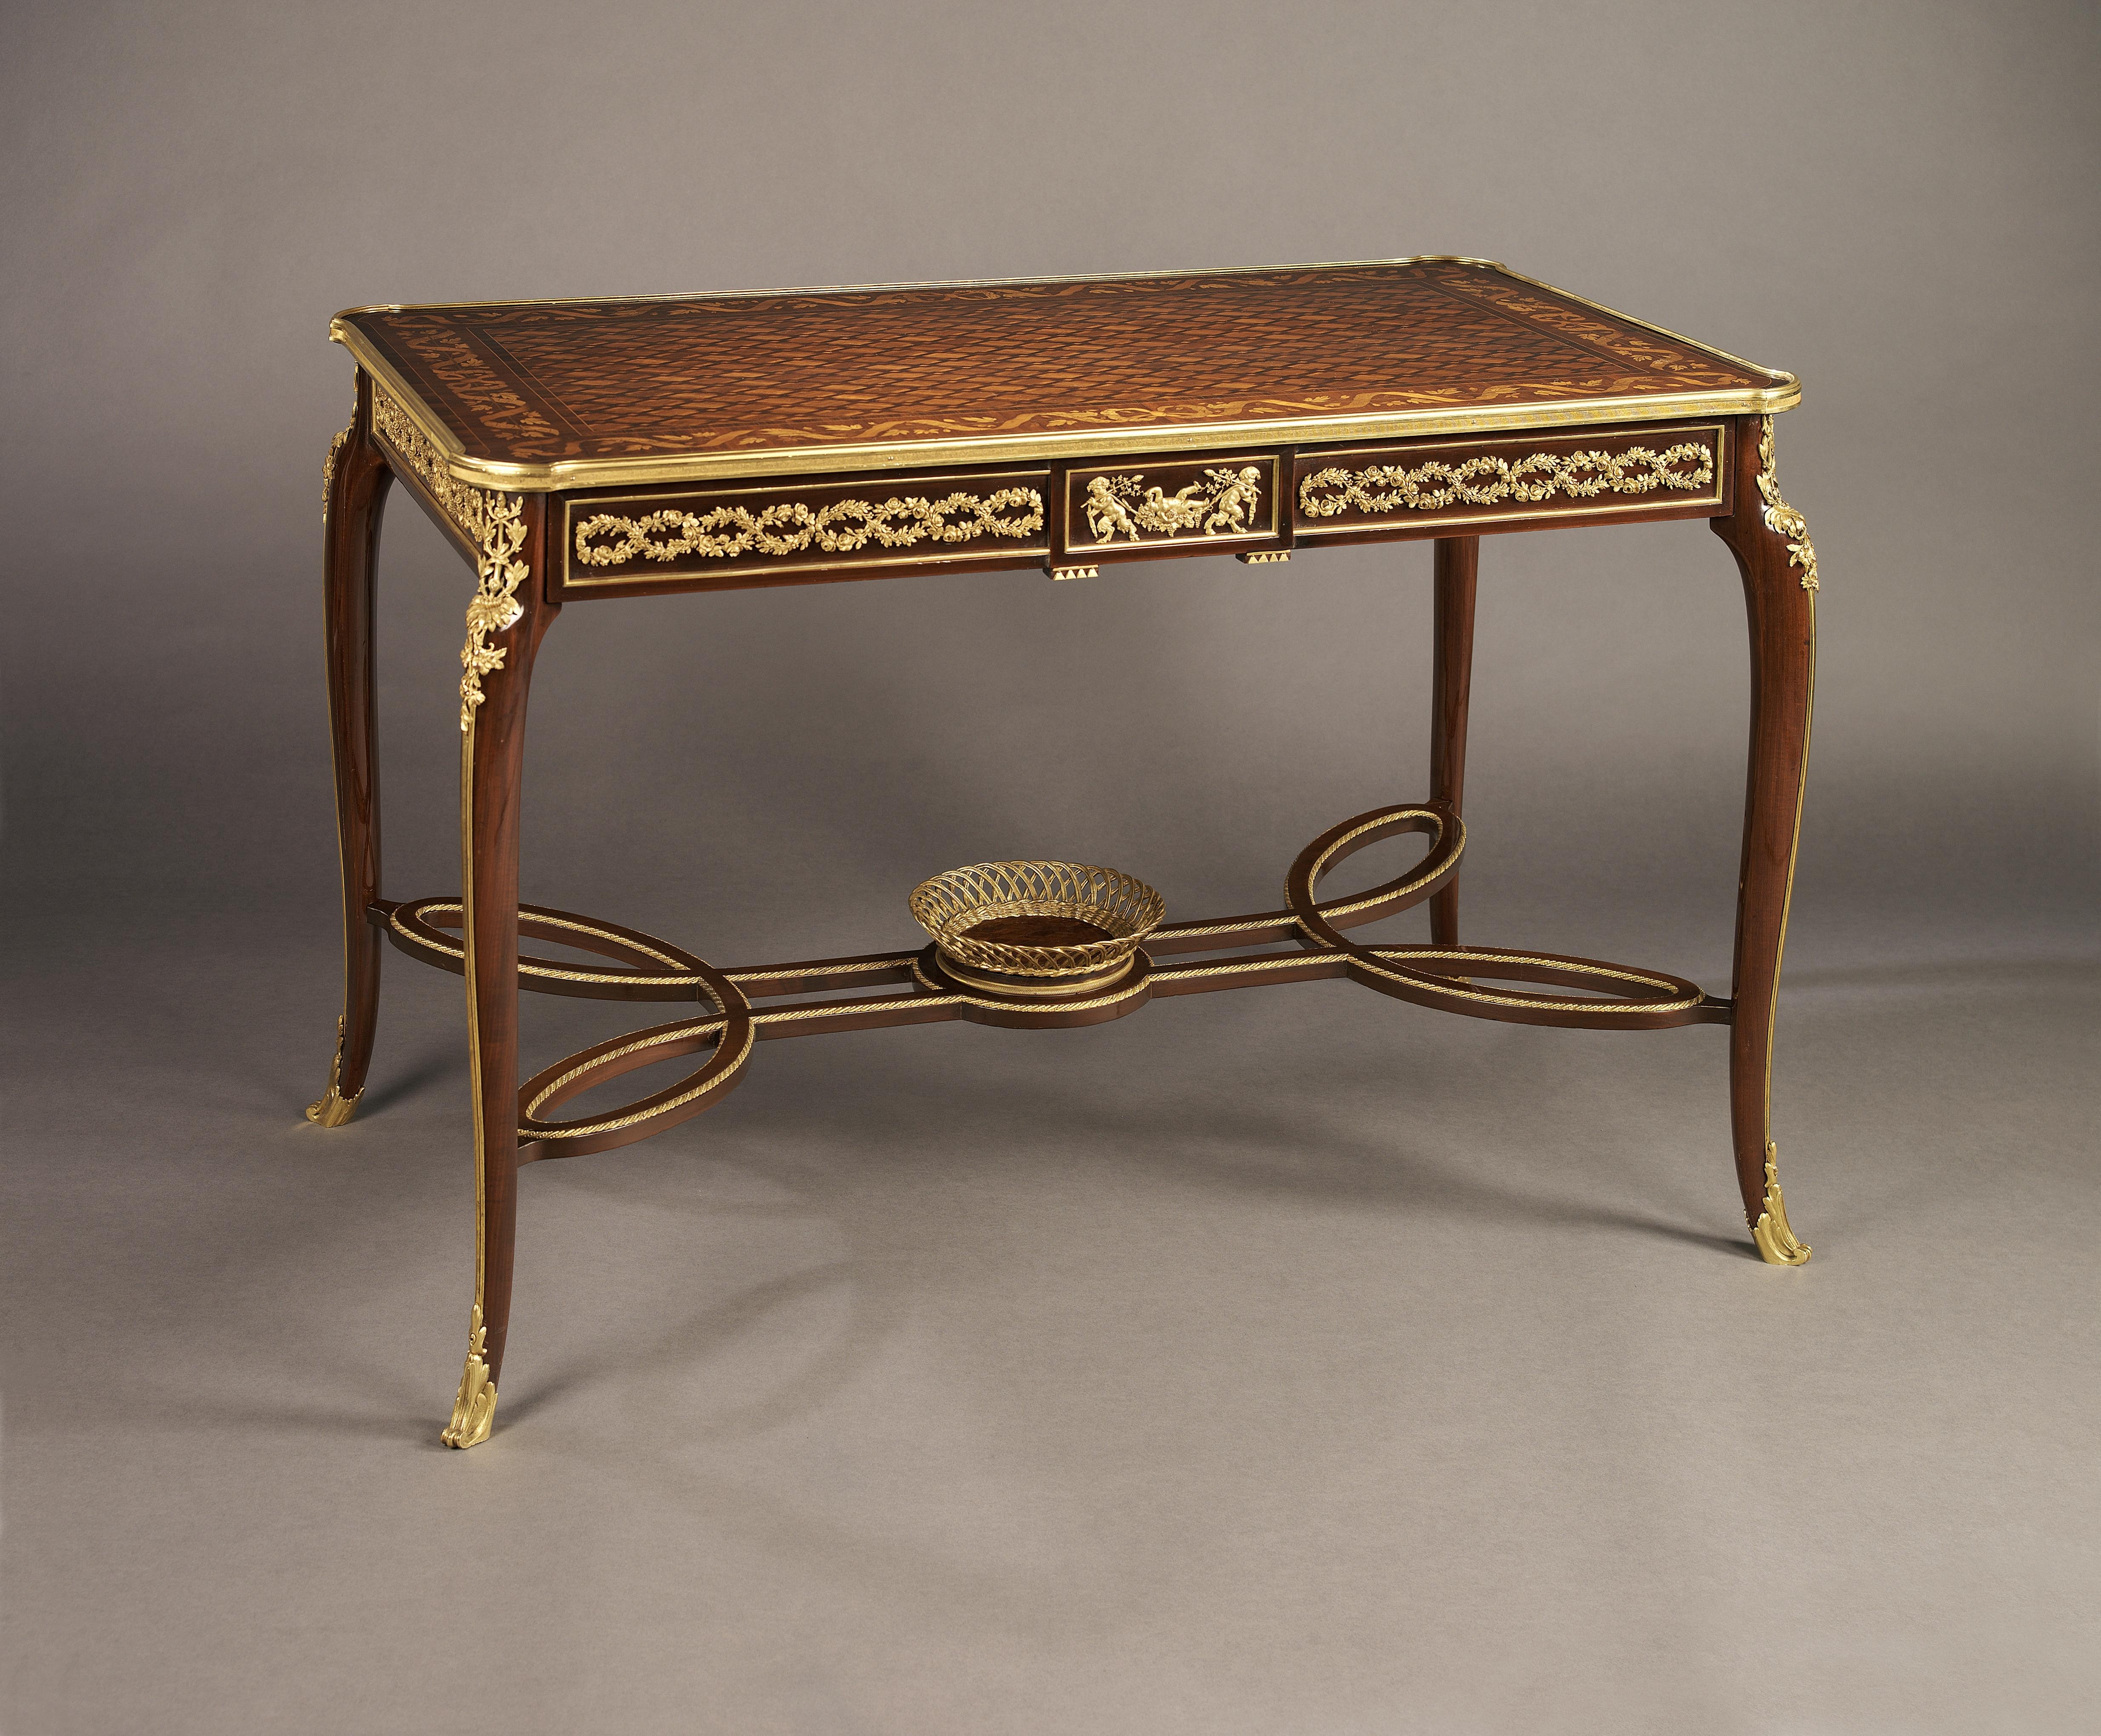 A fine Louis XVI style mahogany and marquetry centre table with gilt bronze mounts attributed to François Linke.

French, circa 1890.

This fine marquetry table has a frieze with a gilt bronze foliate Meander centered by a tablet embellished